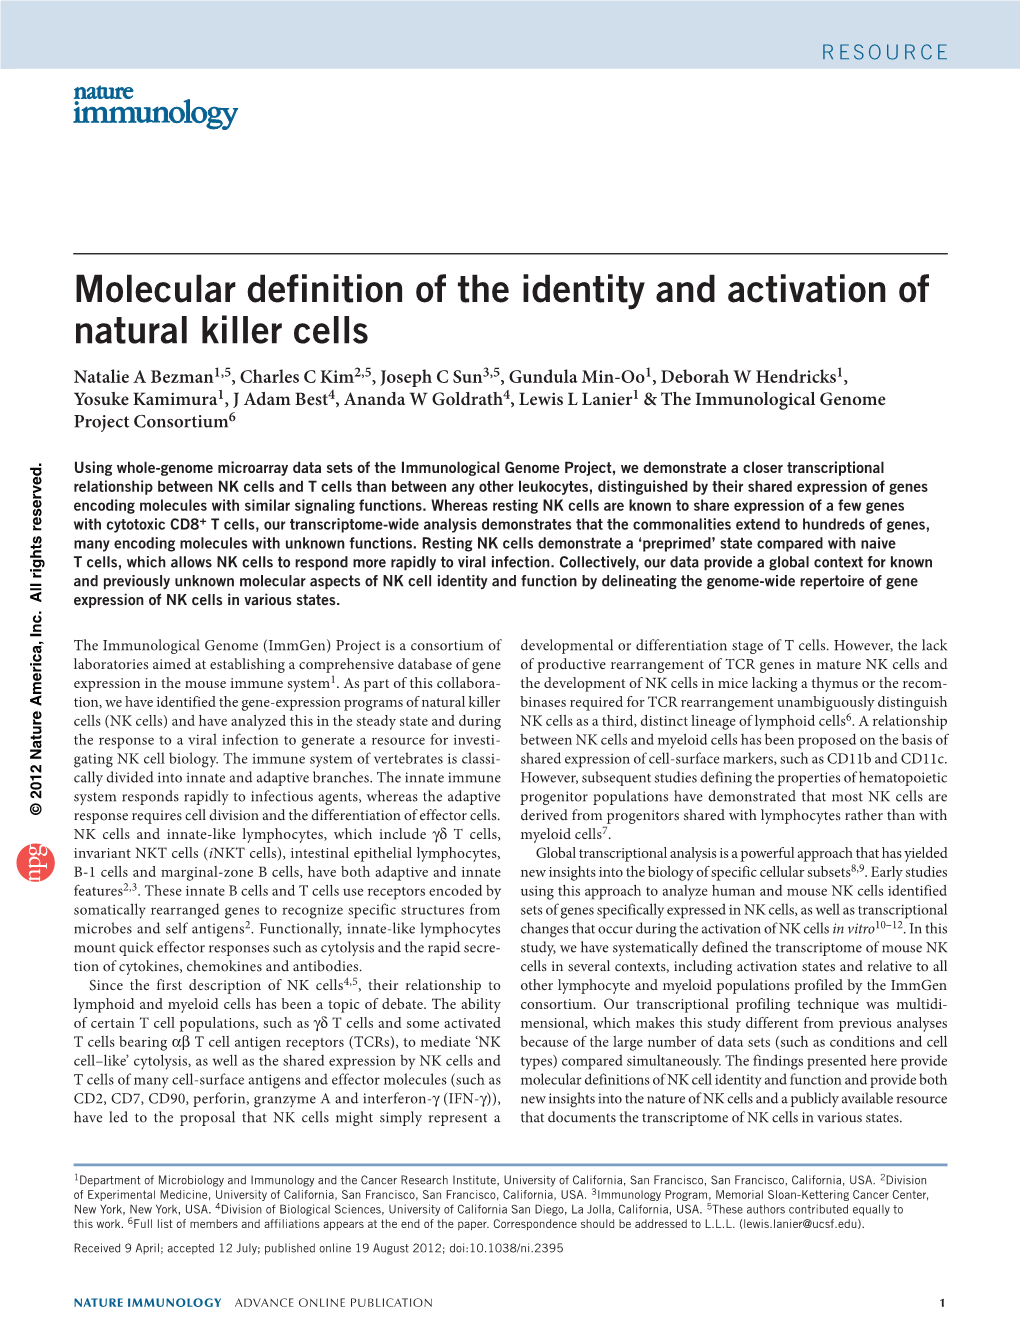 Molecular Definition of the Identity and Activation of Natural Killer Cells